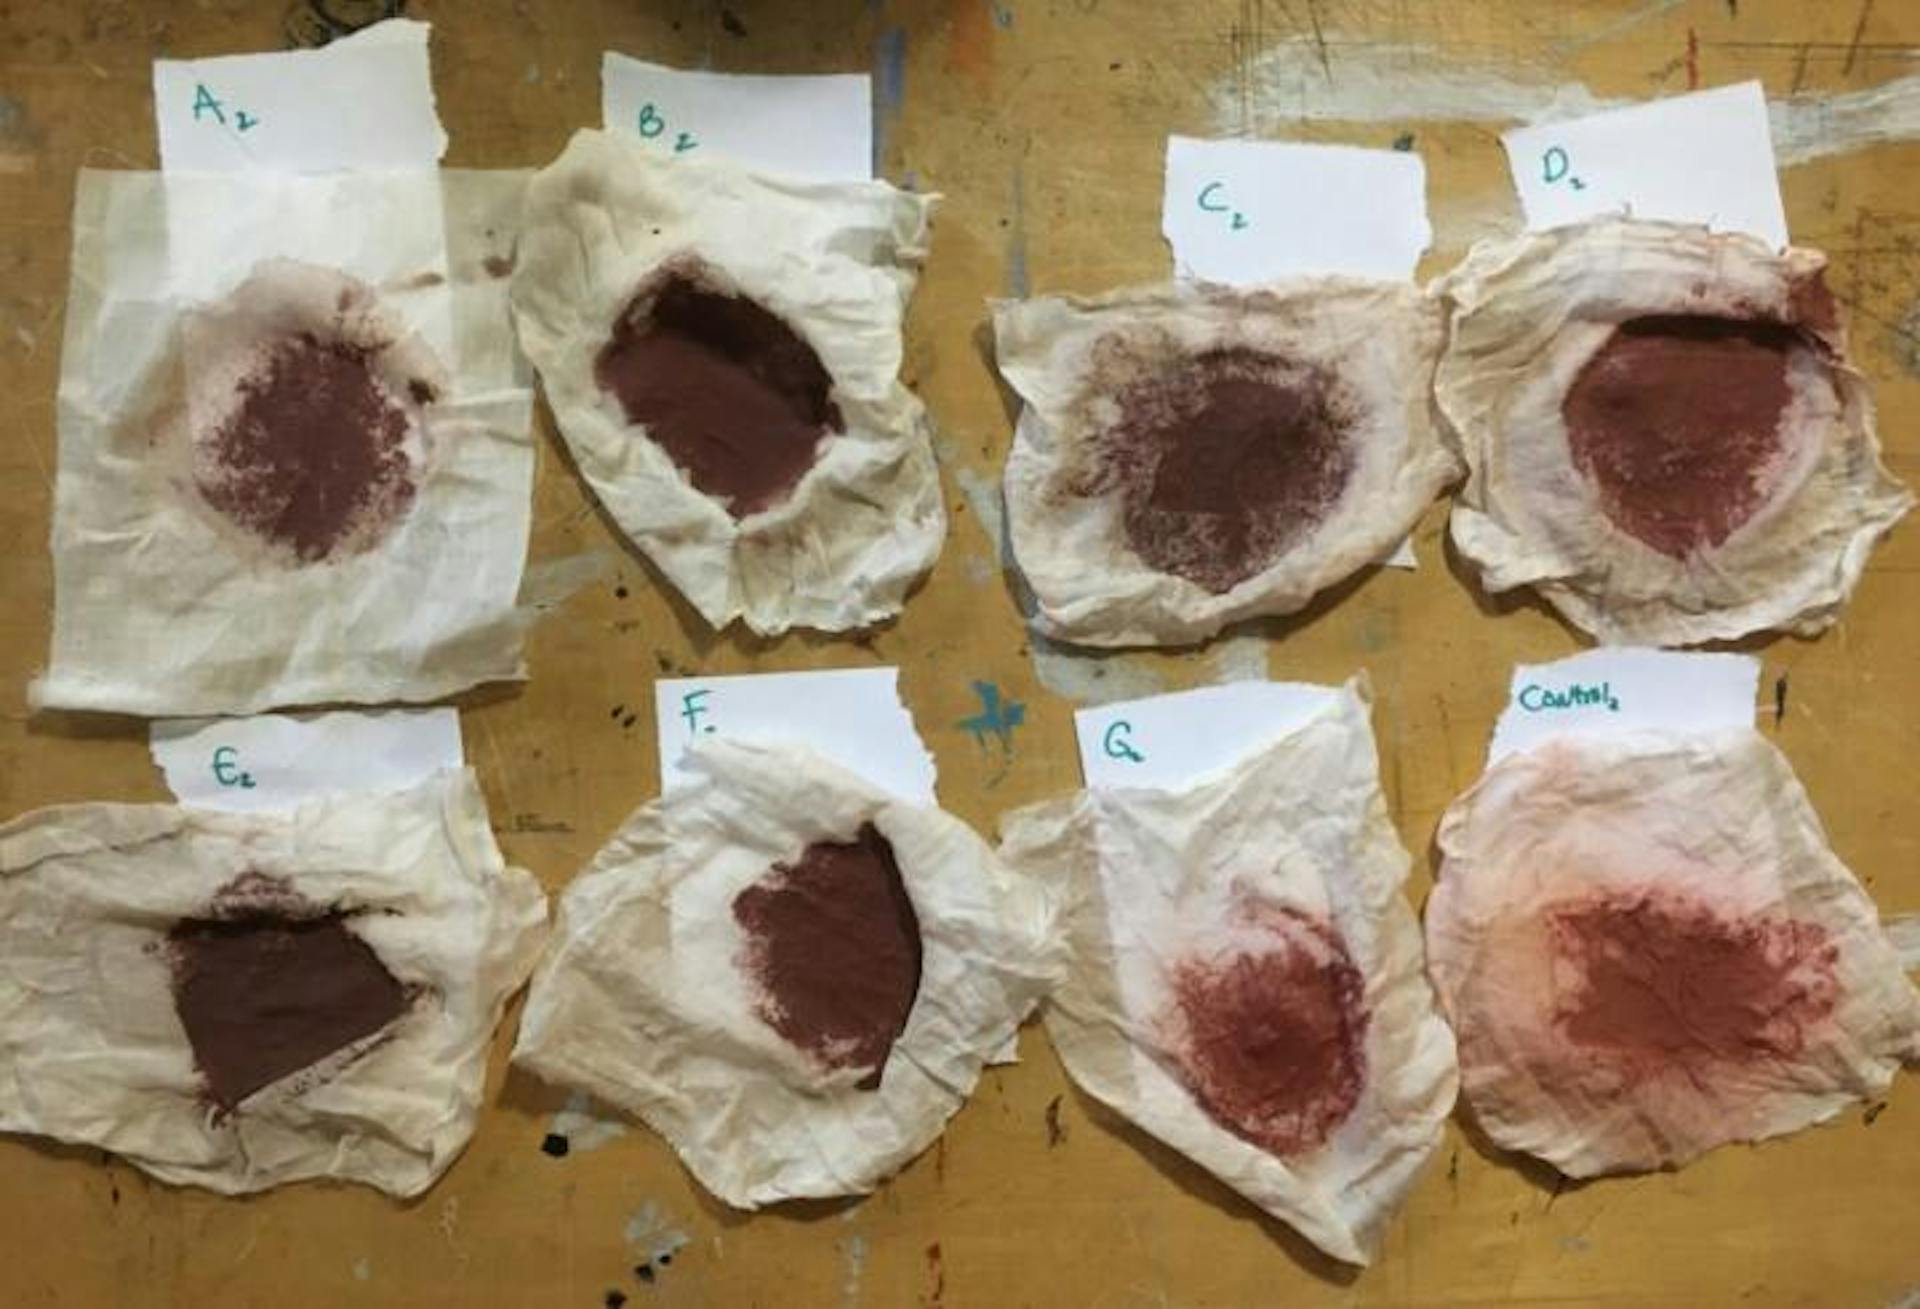 Double-strained results from Bourgeois’s second round of test baths. Both G2 (New Orleans tap water) and the control (bottom right) are a much brighter shade of red than other samples. Credit:Jamie Bourgeois